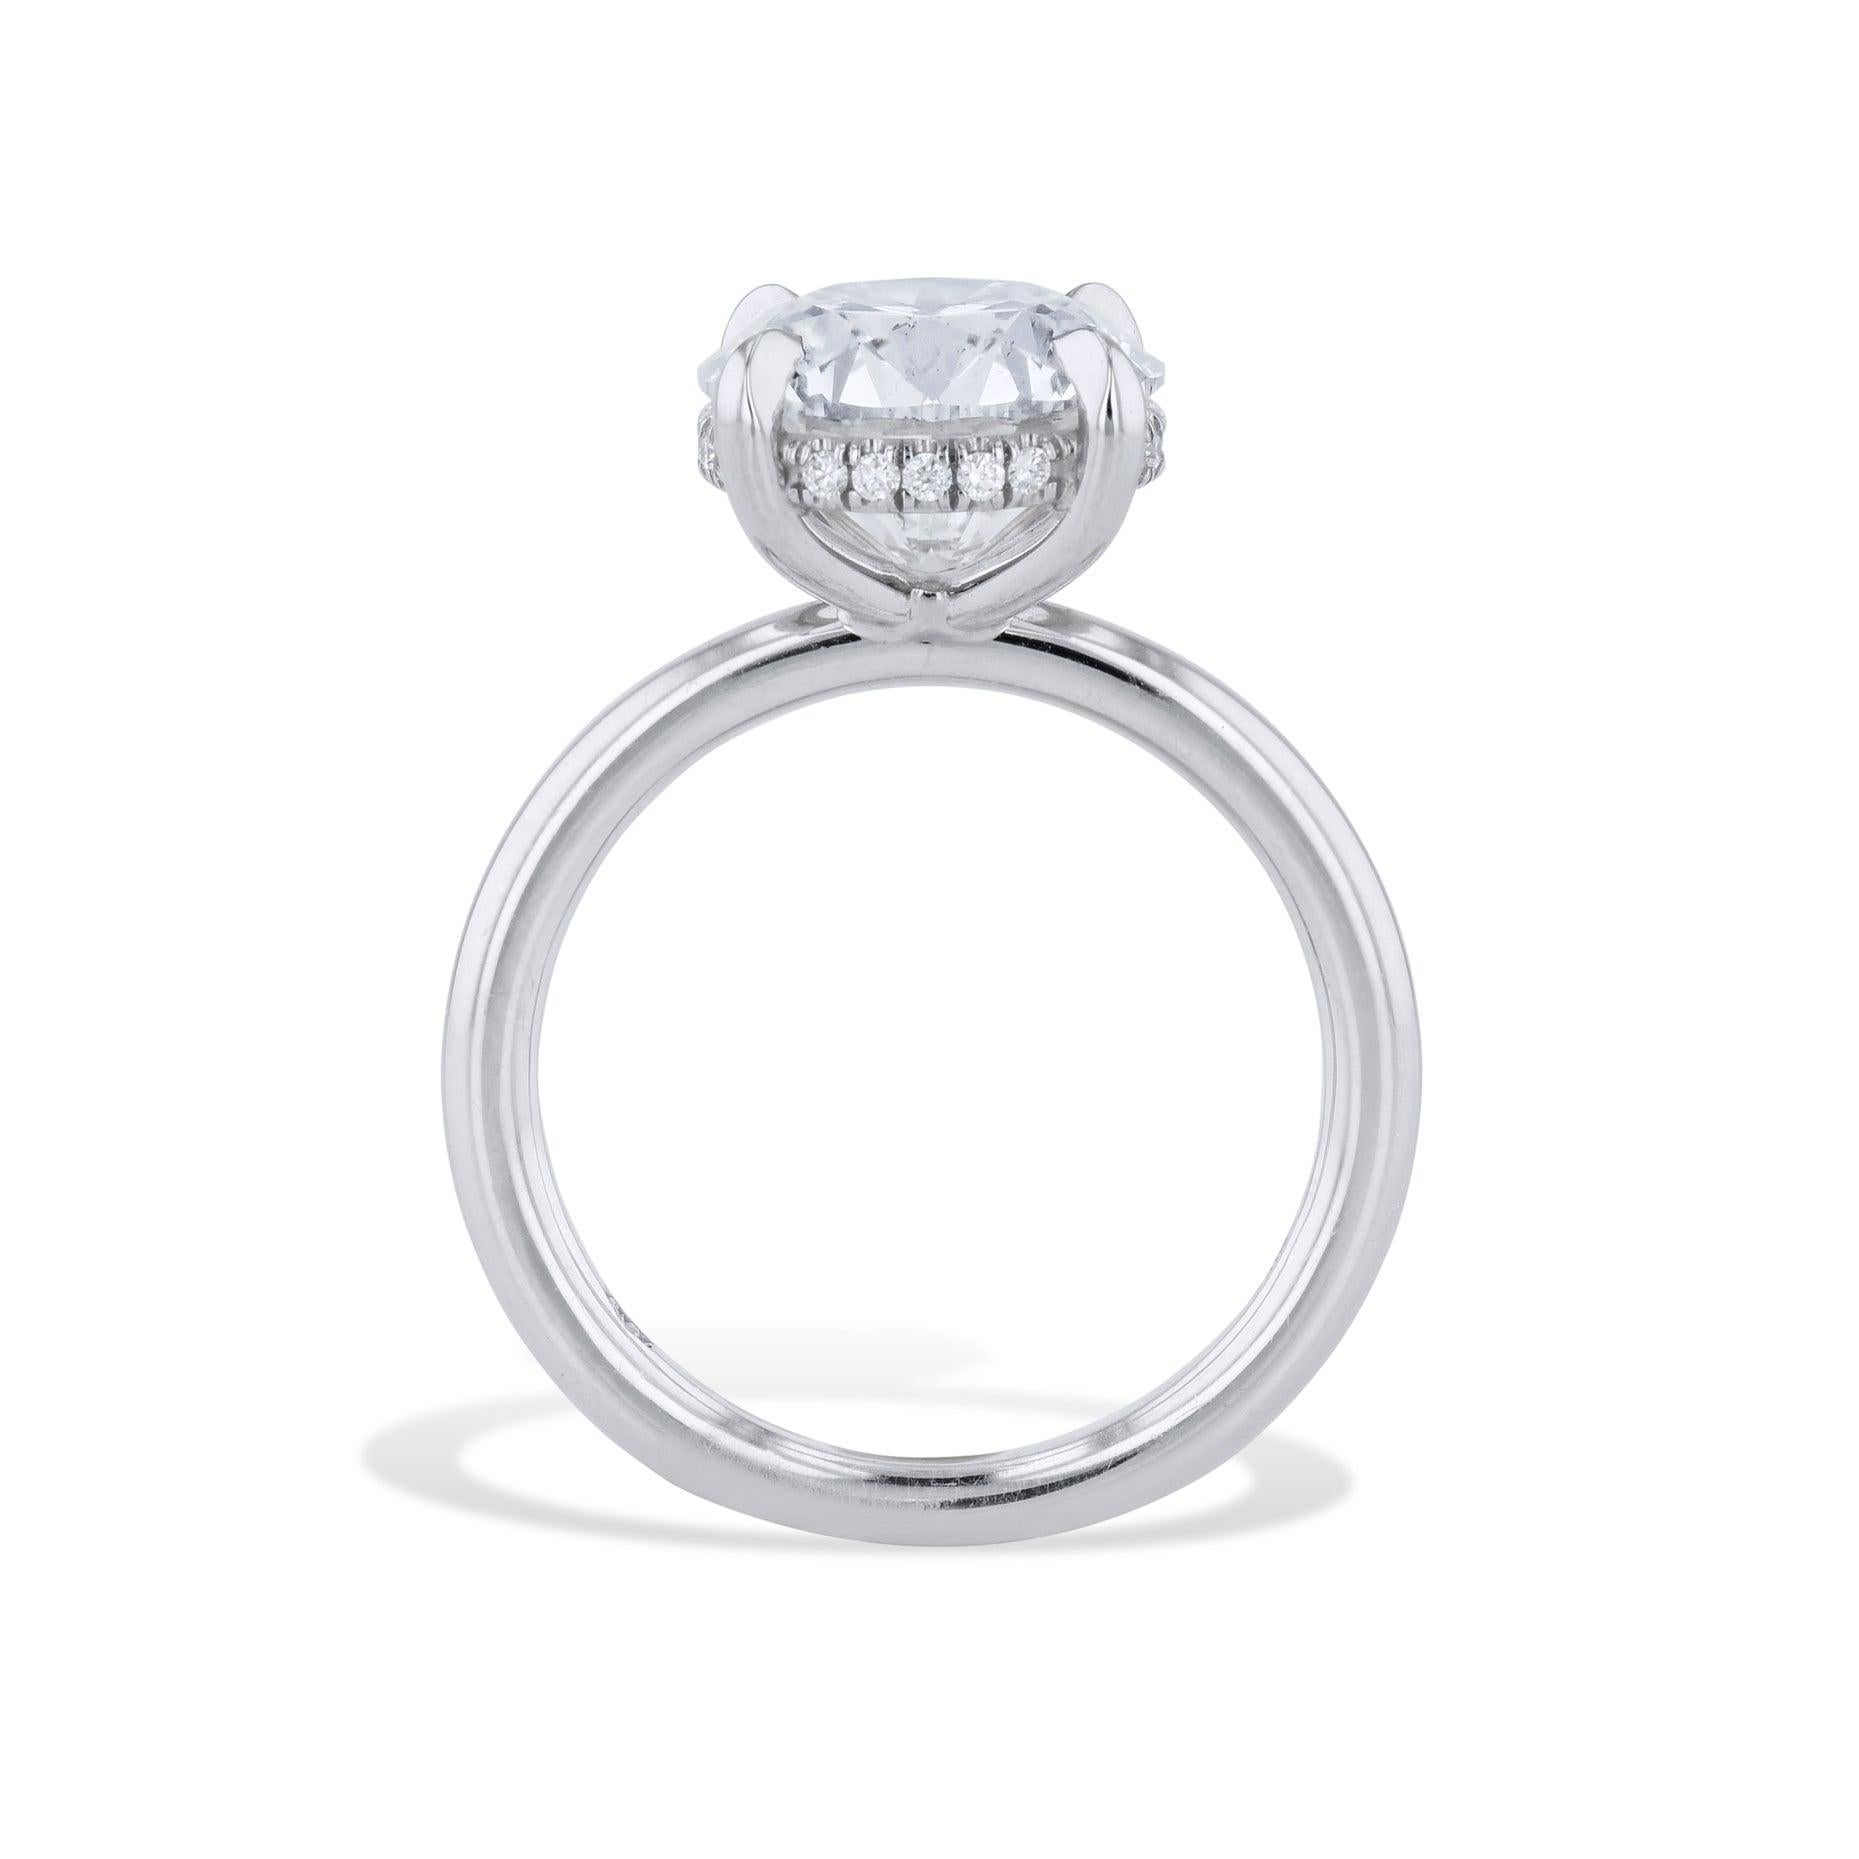 This stunning 3.82 Carat Round Diamond Platinum Engagement Ring will make her heart skip a beat! Featuring a certified center diamond and hand-crafted Diamond Pave under the basket, this ring from the H&H Collection is a beautiful testament to your